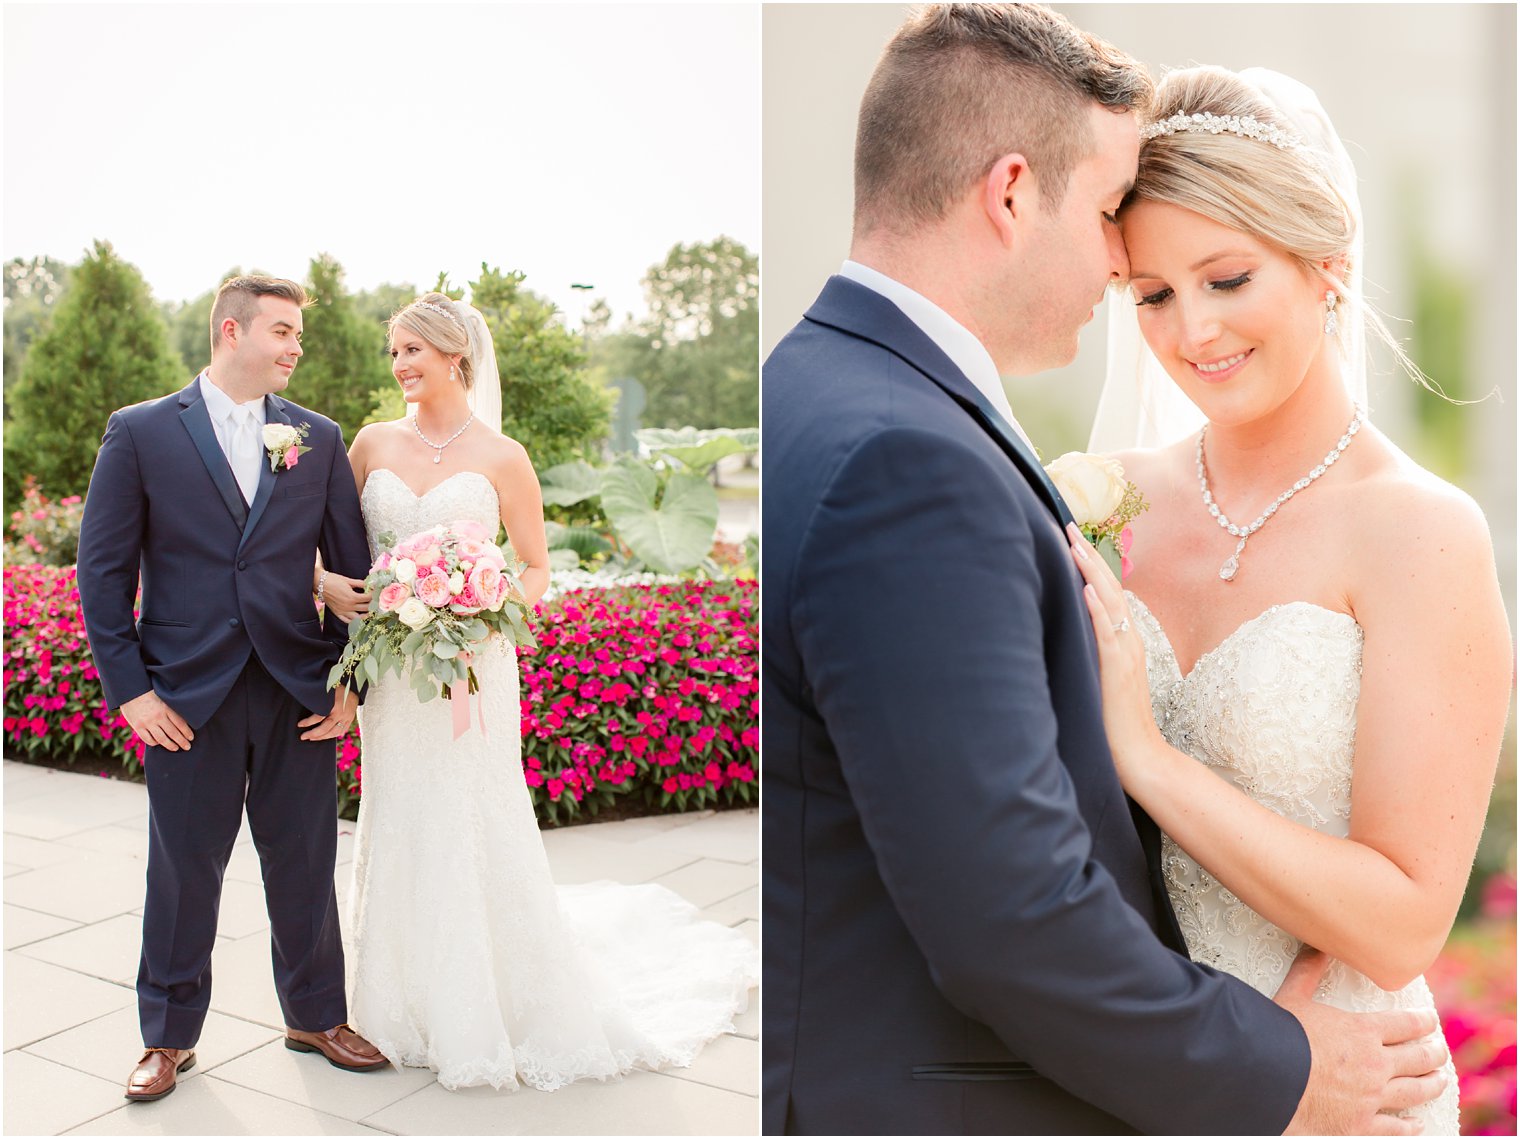 afternoon wedding portraits photographed by Idalia Photography at Palace at Somerset Park